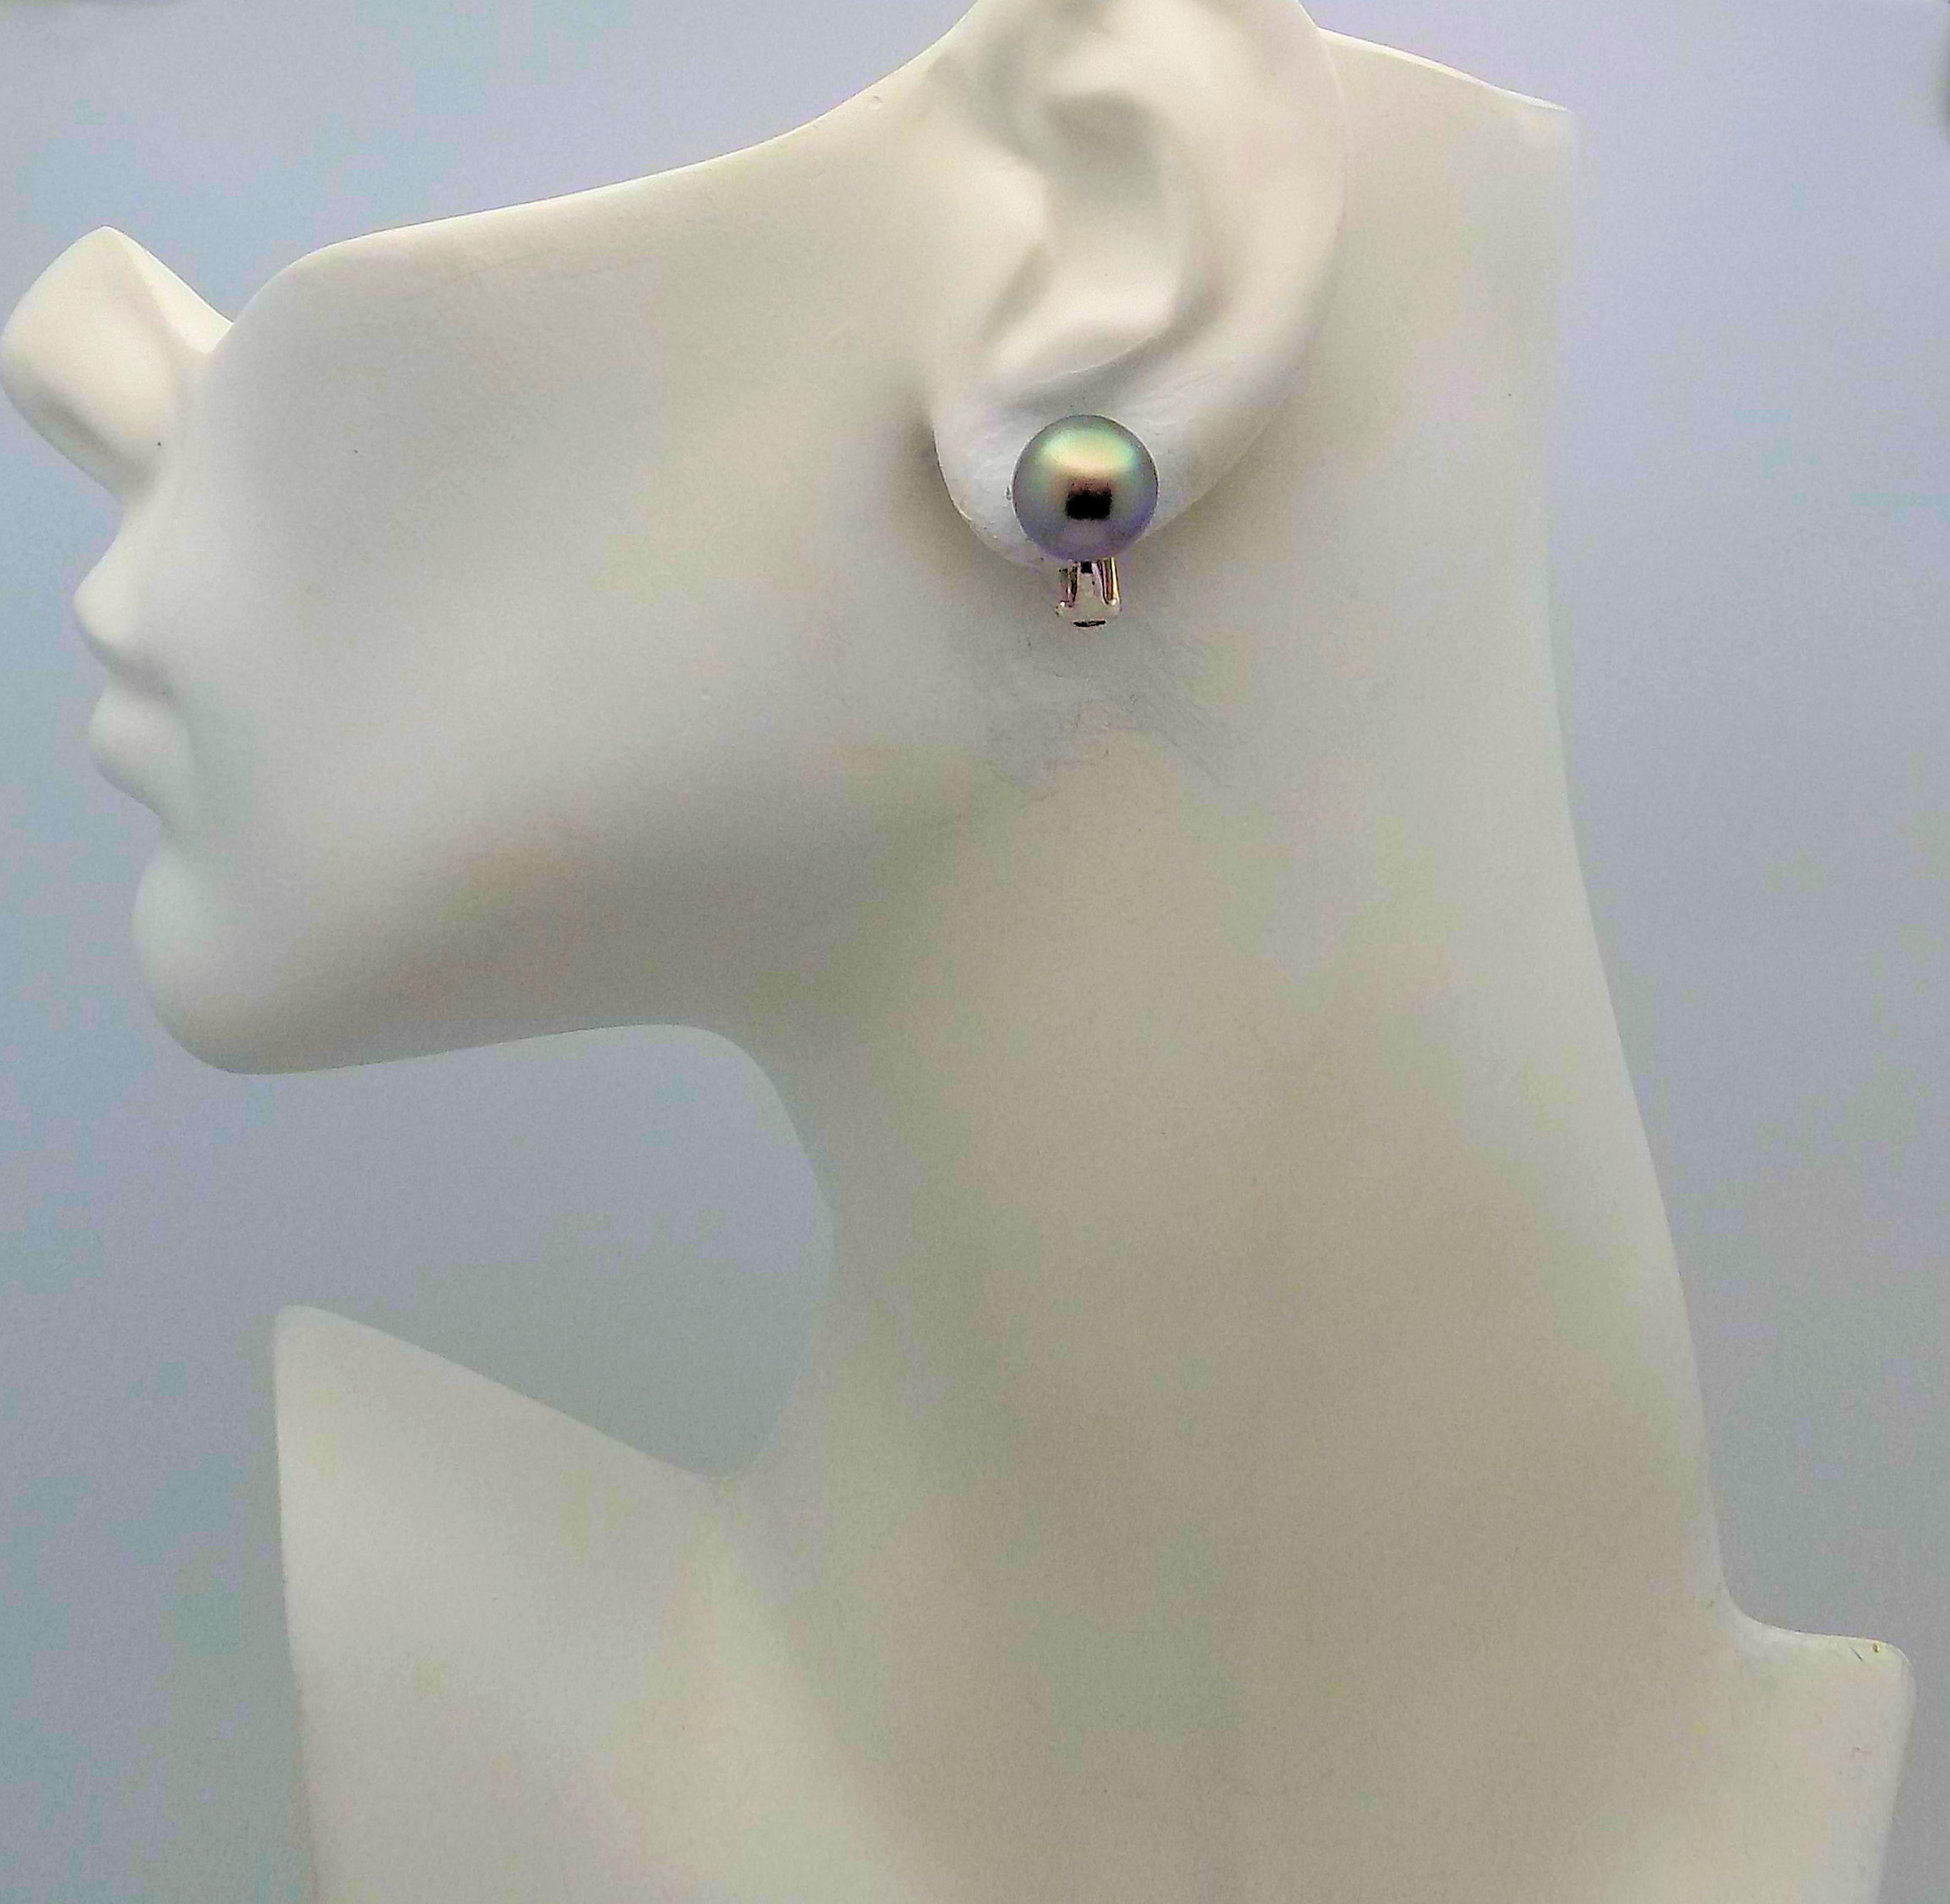 Classic Pair of Platinum & 18 karat White Gold Clip Earrings Featuring 2 Tahitian South Sea Cultured Pearls 11.7 X 12.0 MM with Medium Light Peacock Overtones 5.6 DWT or 8.71 Grams.